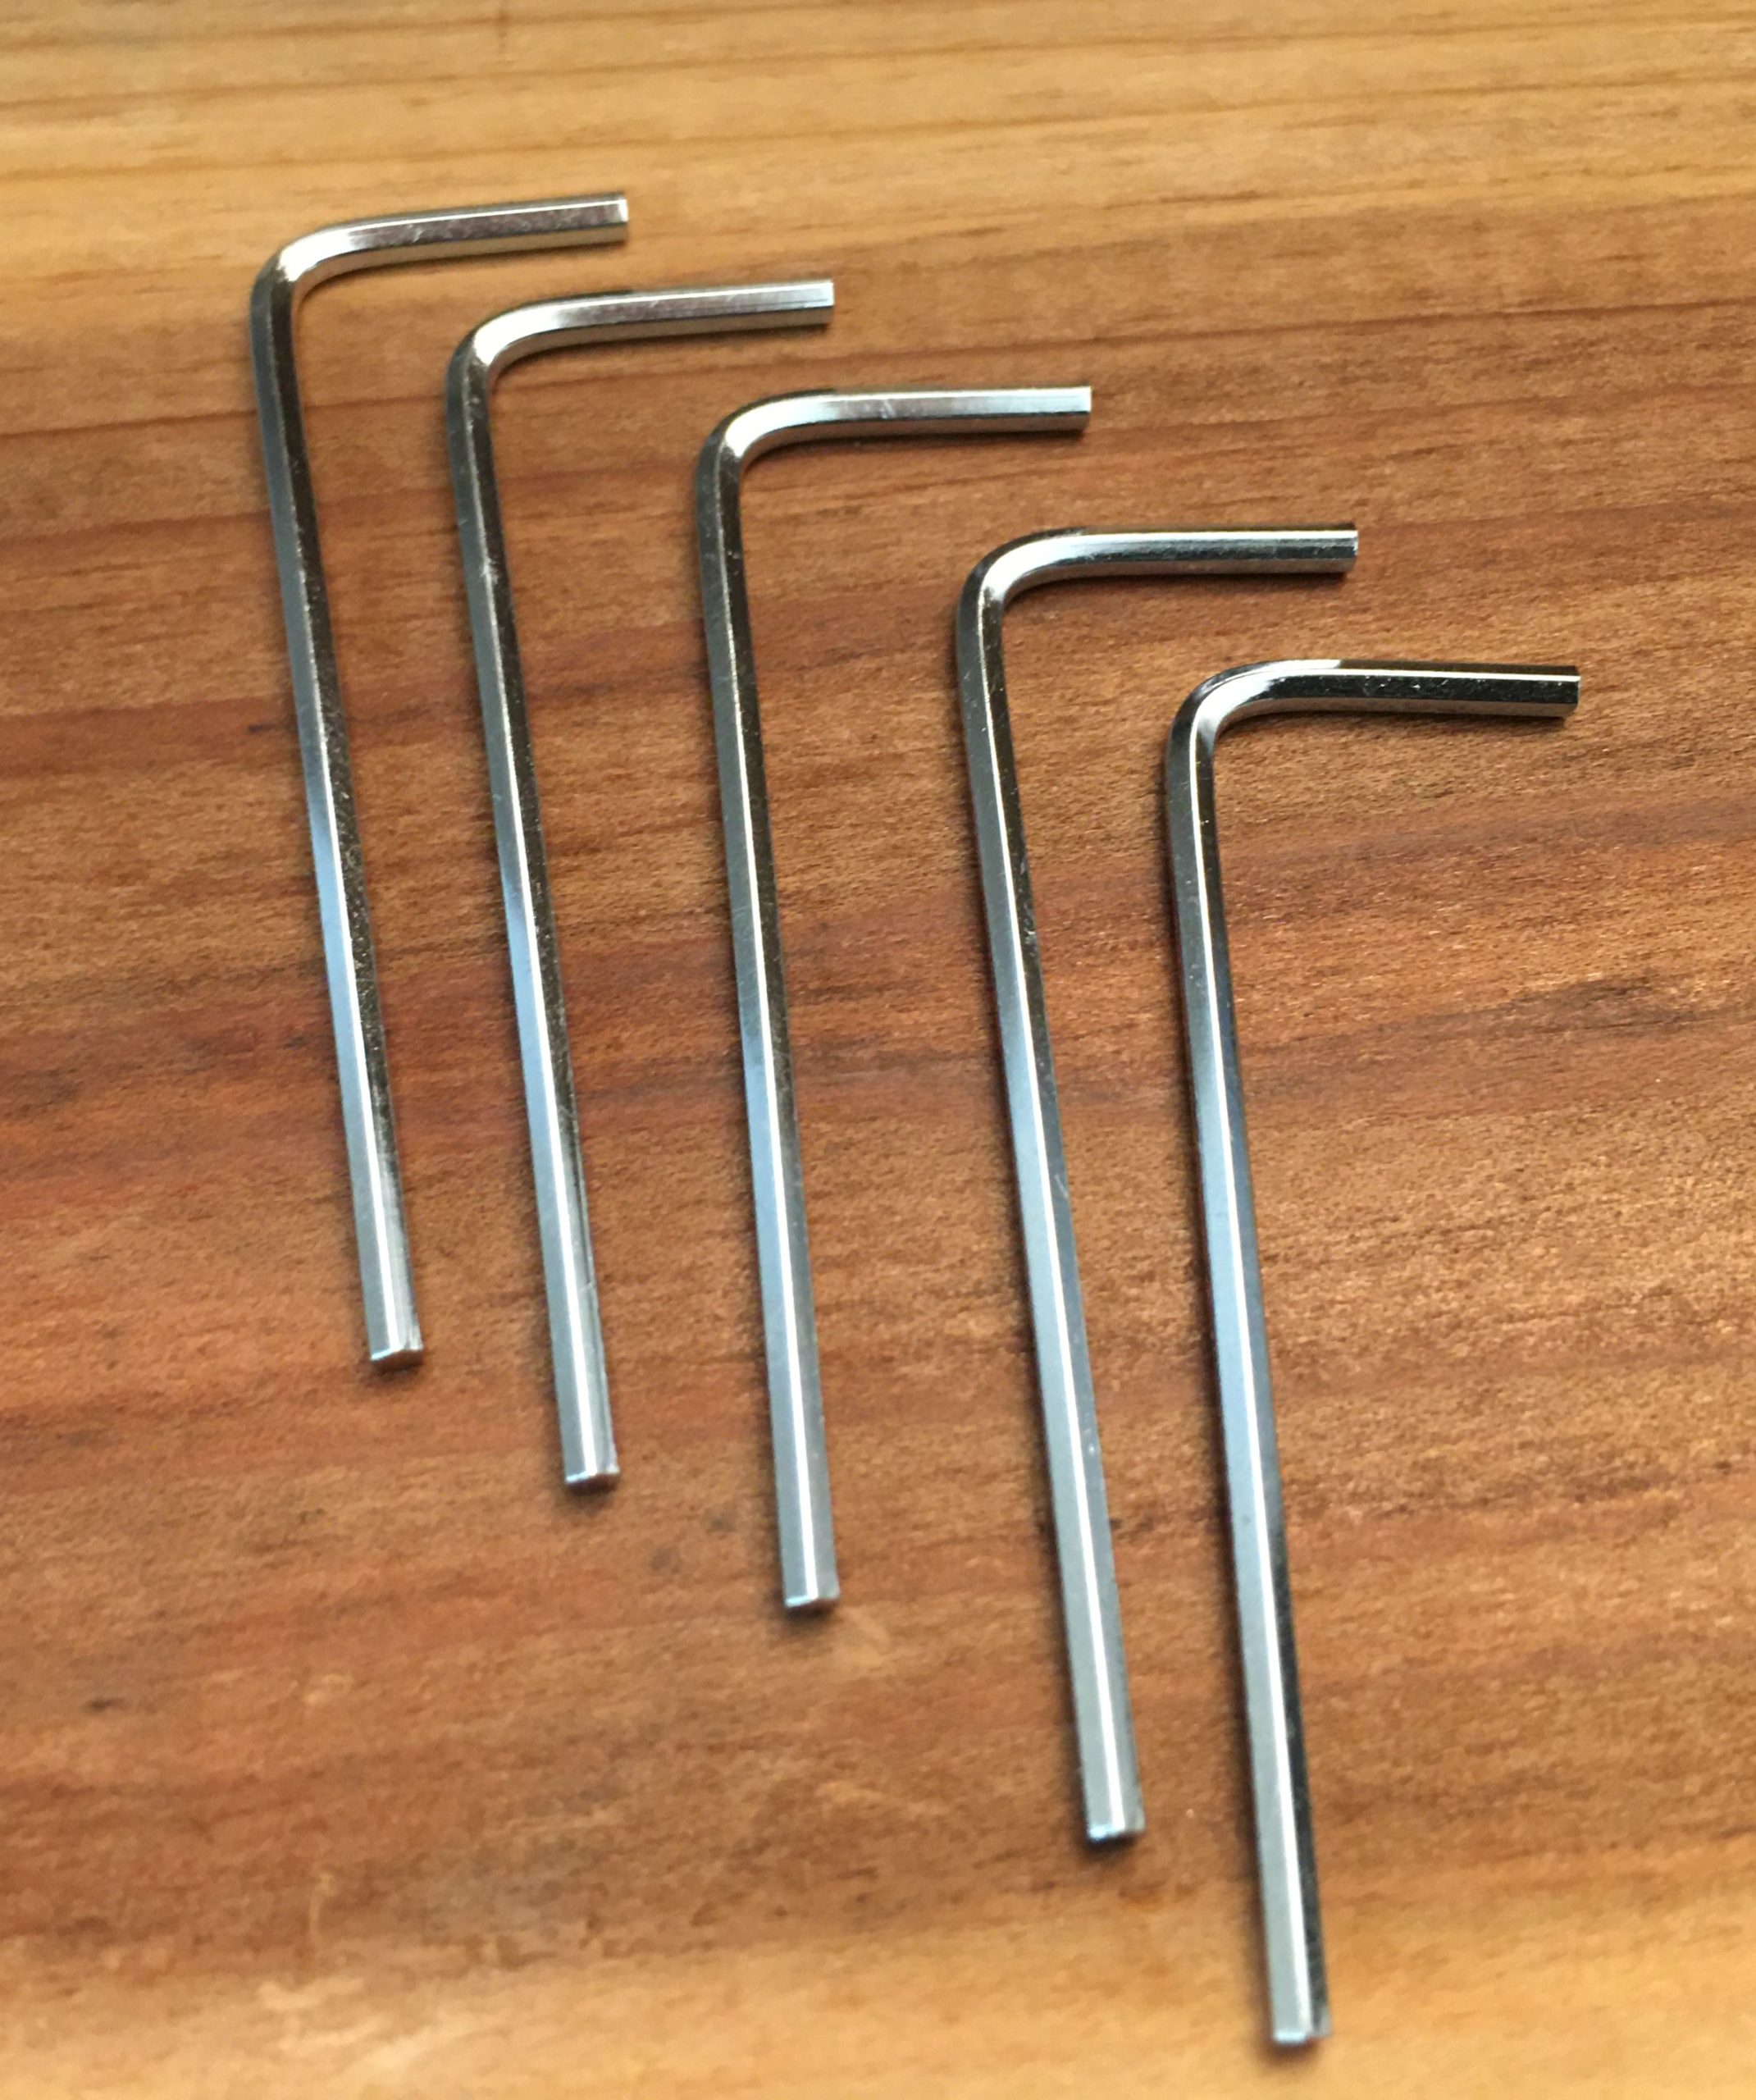 2.5mm Allen Wrenches